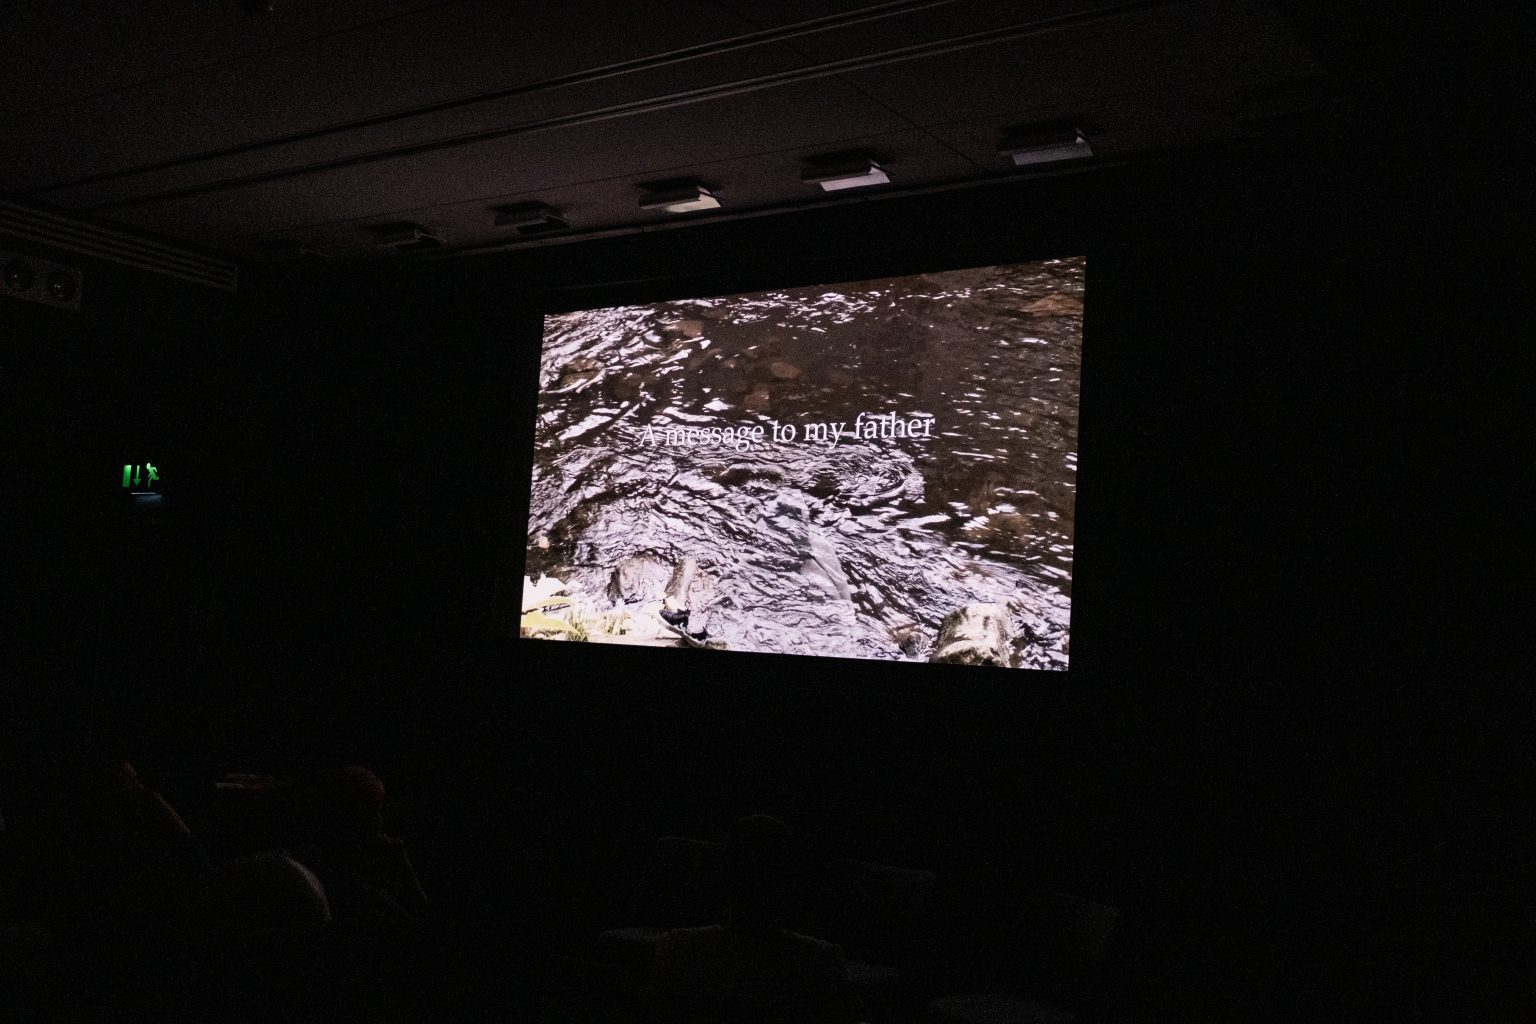 A cinema screen showing a scene from a film. On the screen there is an image of a body of flowing water and text which says 'A message to my father'.